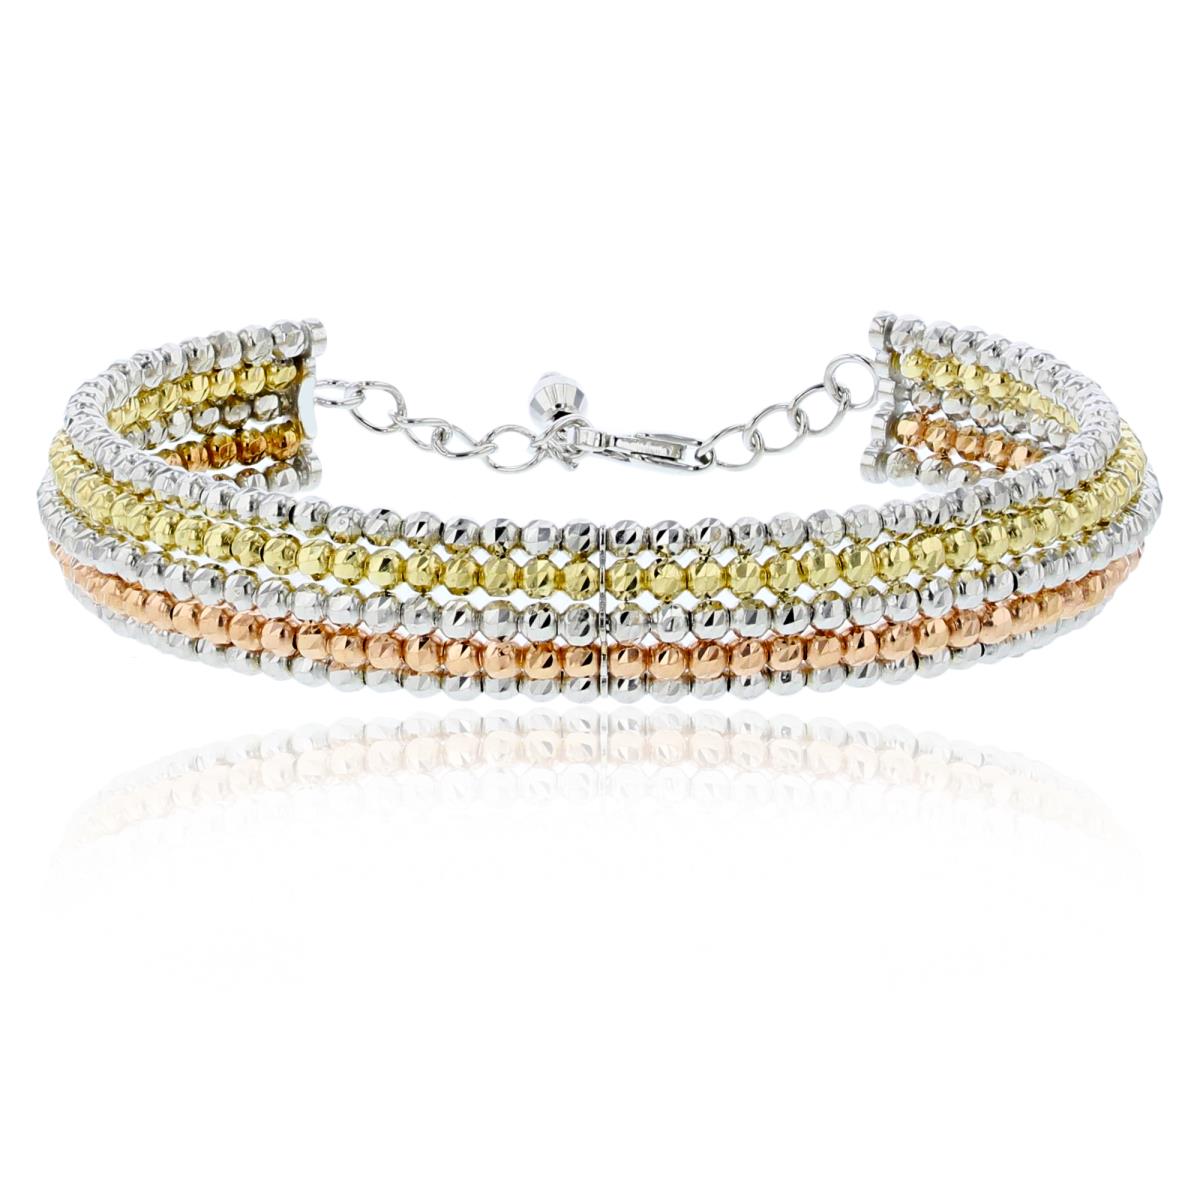 14K Tri-Color Gold 5-Row Diamond Cut 11mm Wide Beaded Bangle Bracelet with 1" Extender